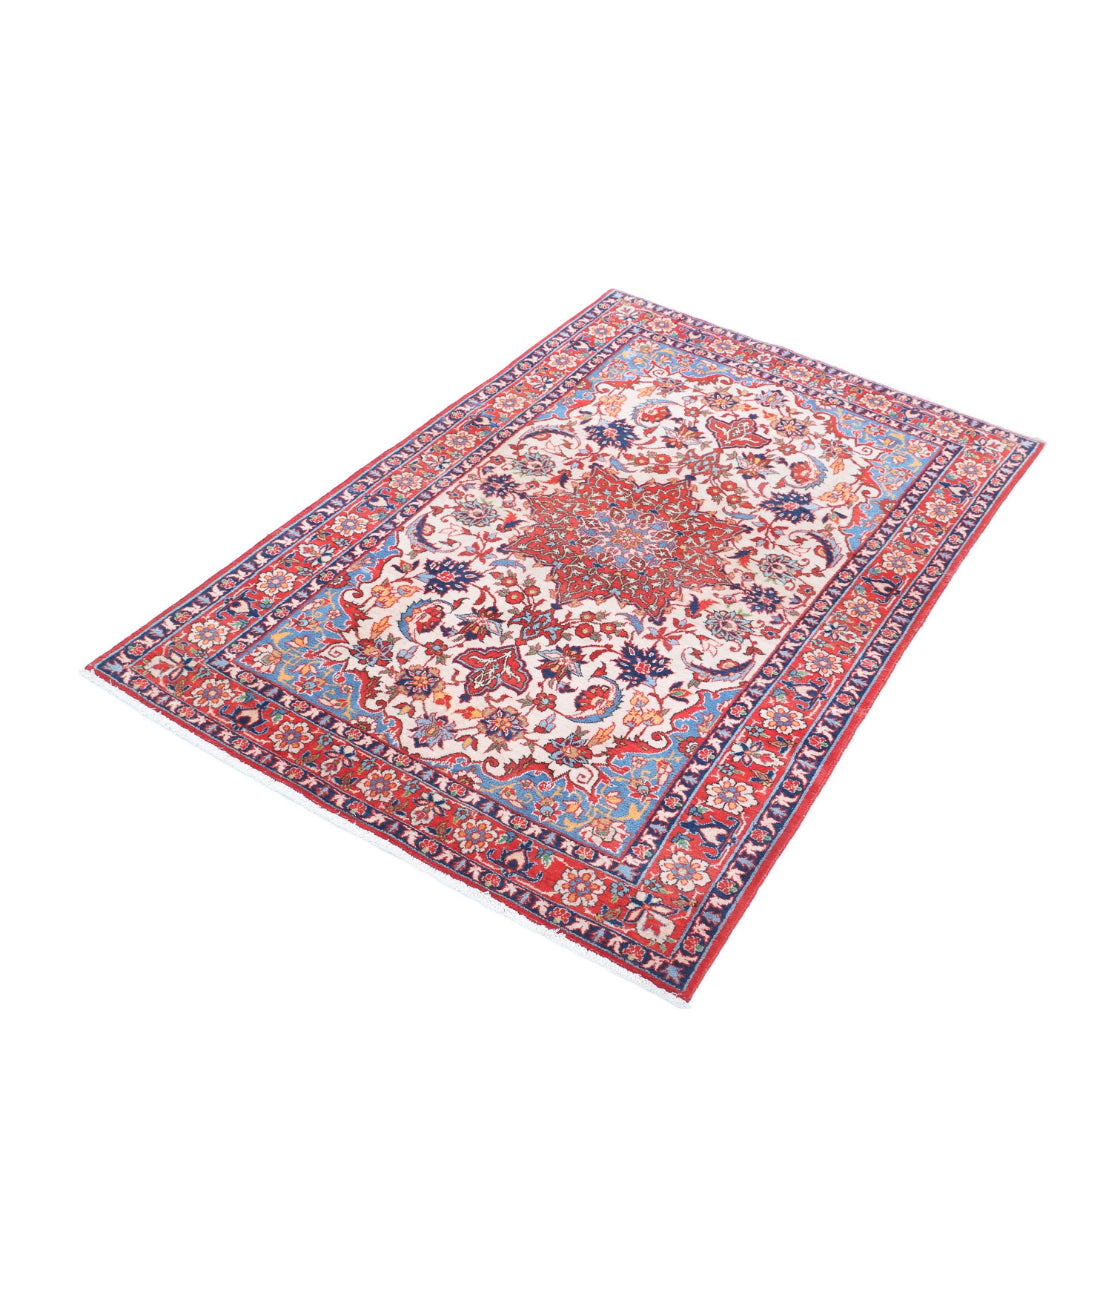 Hand Knotted Persian Isfahan Wool Rug - 3'3'' x 4'10'' 3'3'' x 4'10'' (98 X 145) / Ivory / Red